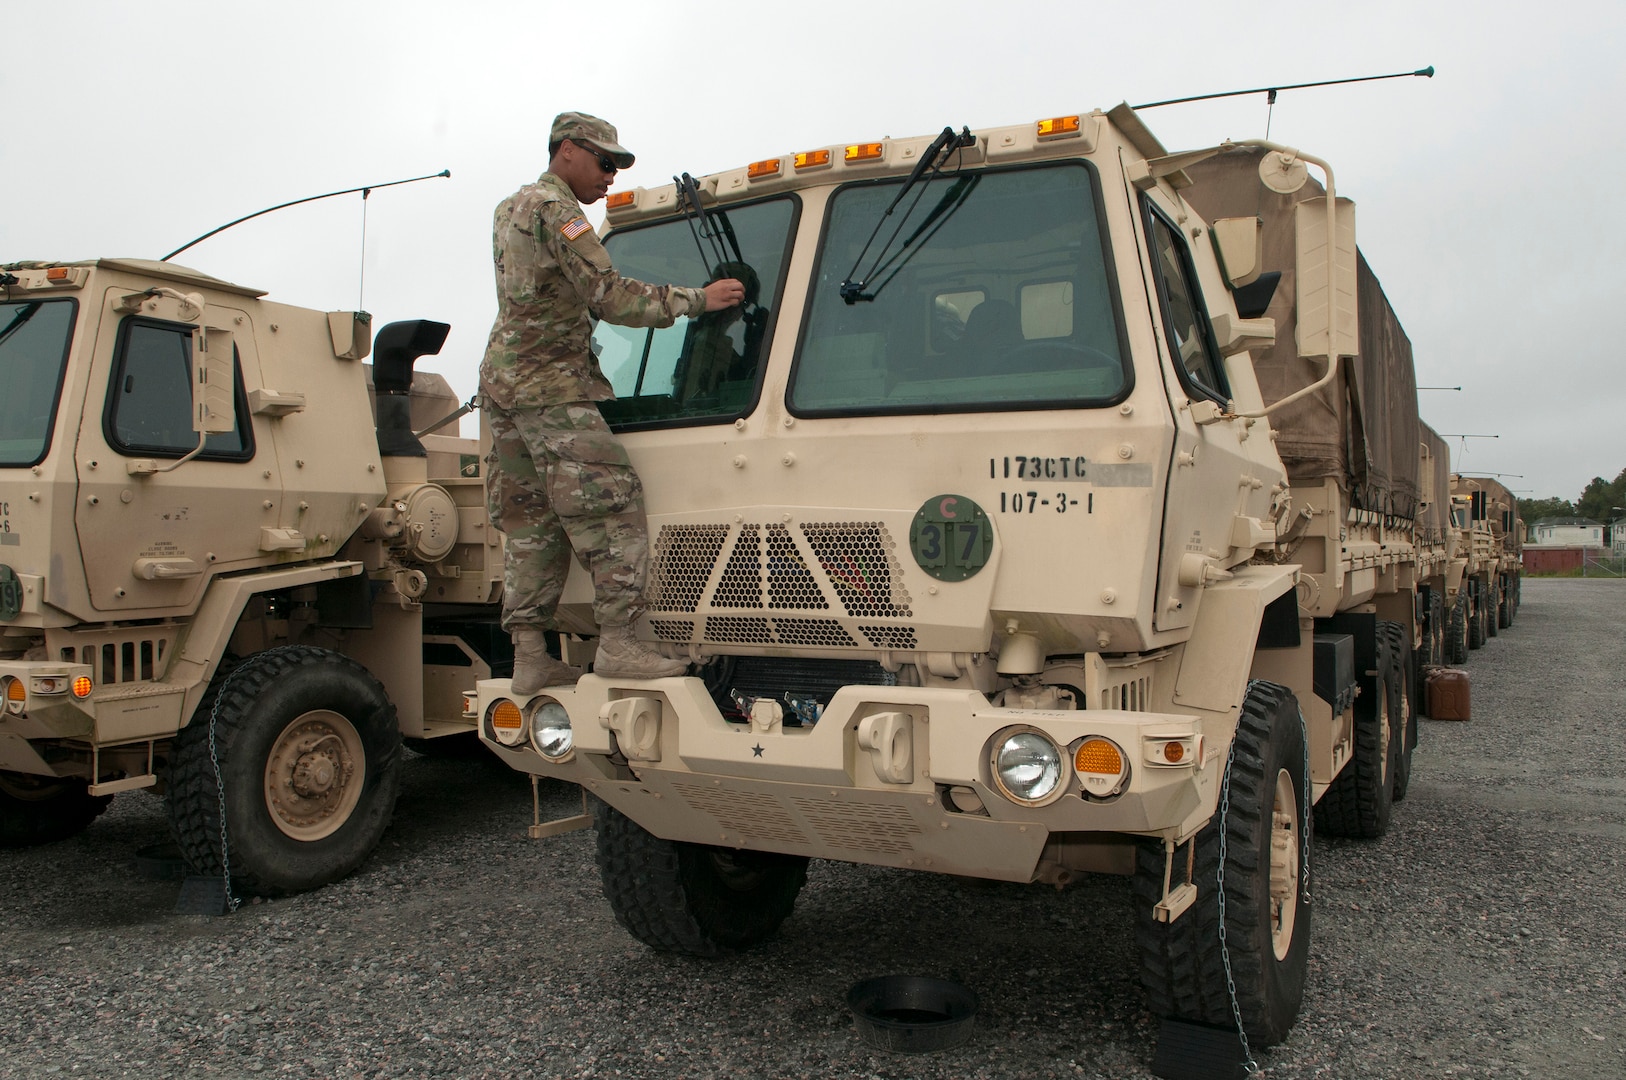 Soldiers assigned to the Virginia National Guard's 1173rd Transportation Company, 529th Combat Sustainment Support Battalion, 329th Regional Support Group assemble six Light Medium Tactical Vehicles with supplies including food, fuel, protectice equipment met and wet weather gear Sept. 13, 2018, at the State Military Reservation in Virginia Beach. The LMTVs deployed to fire stations in Chesapeake, Virginia, to assist with possible hurricane response operations as Hurricane Florence makes landfall.